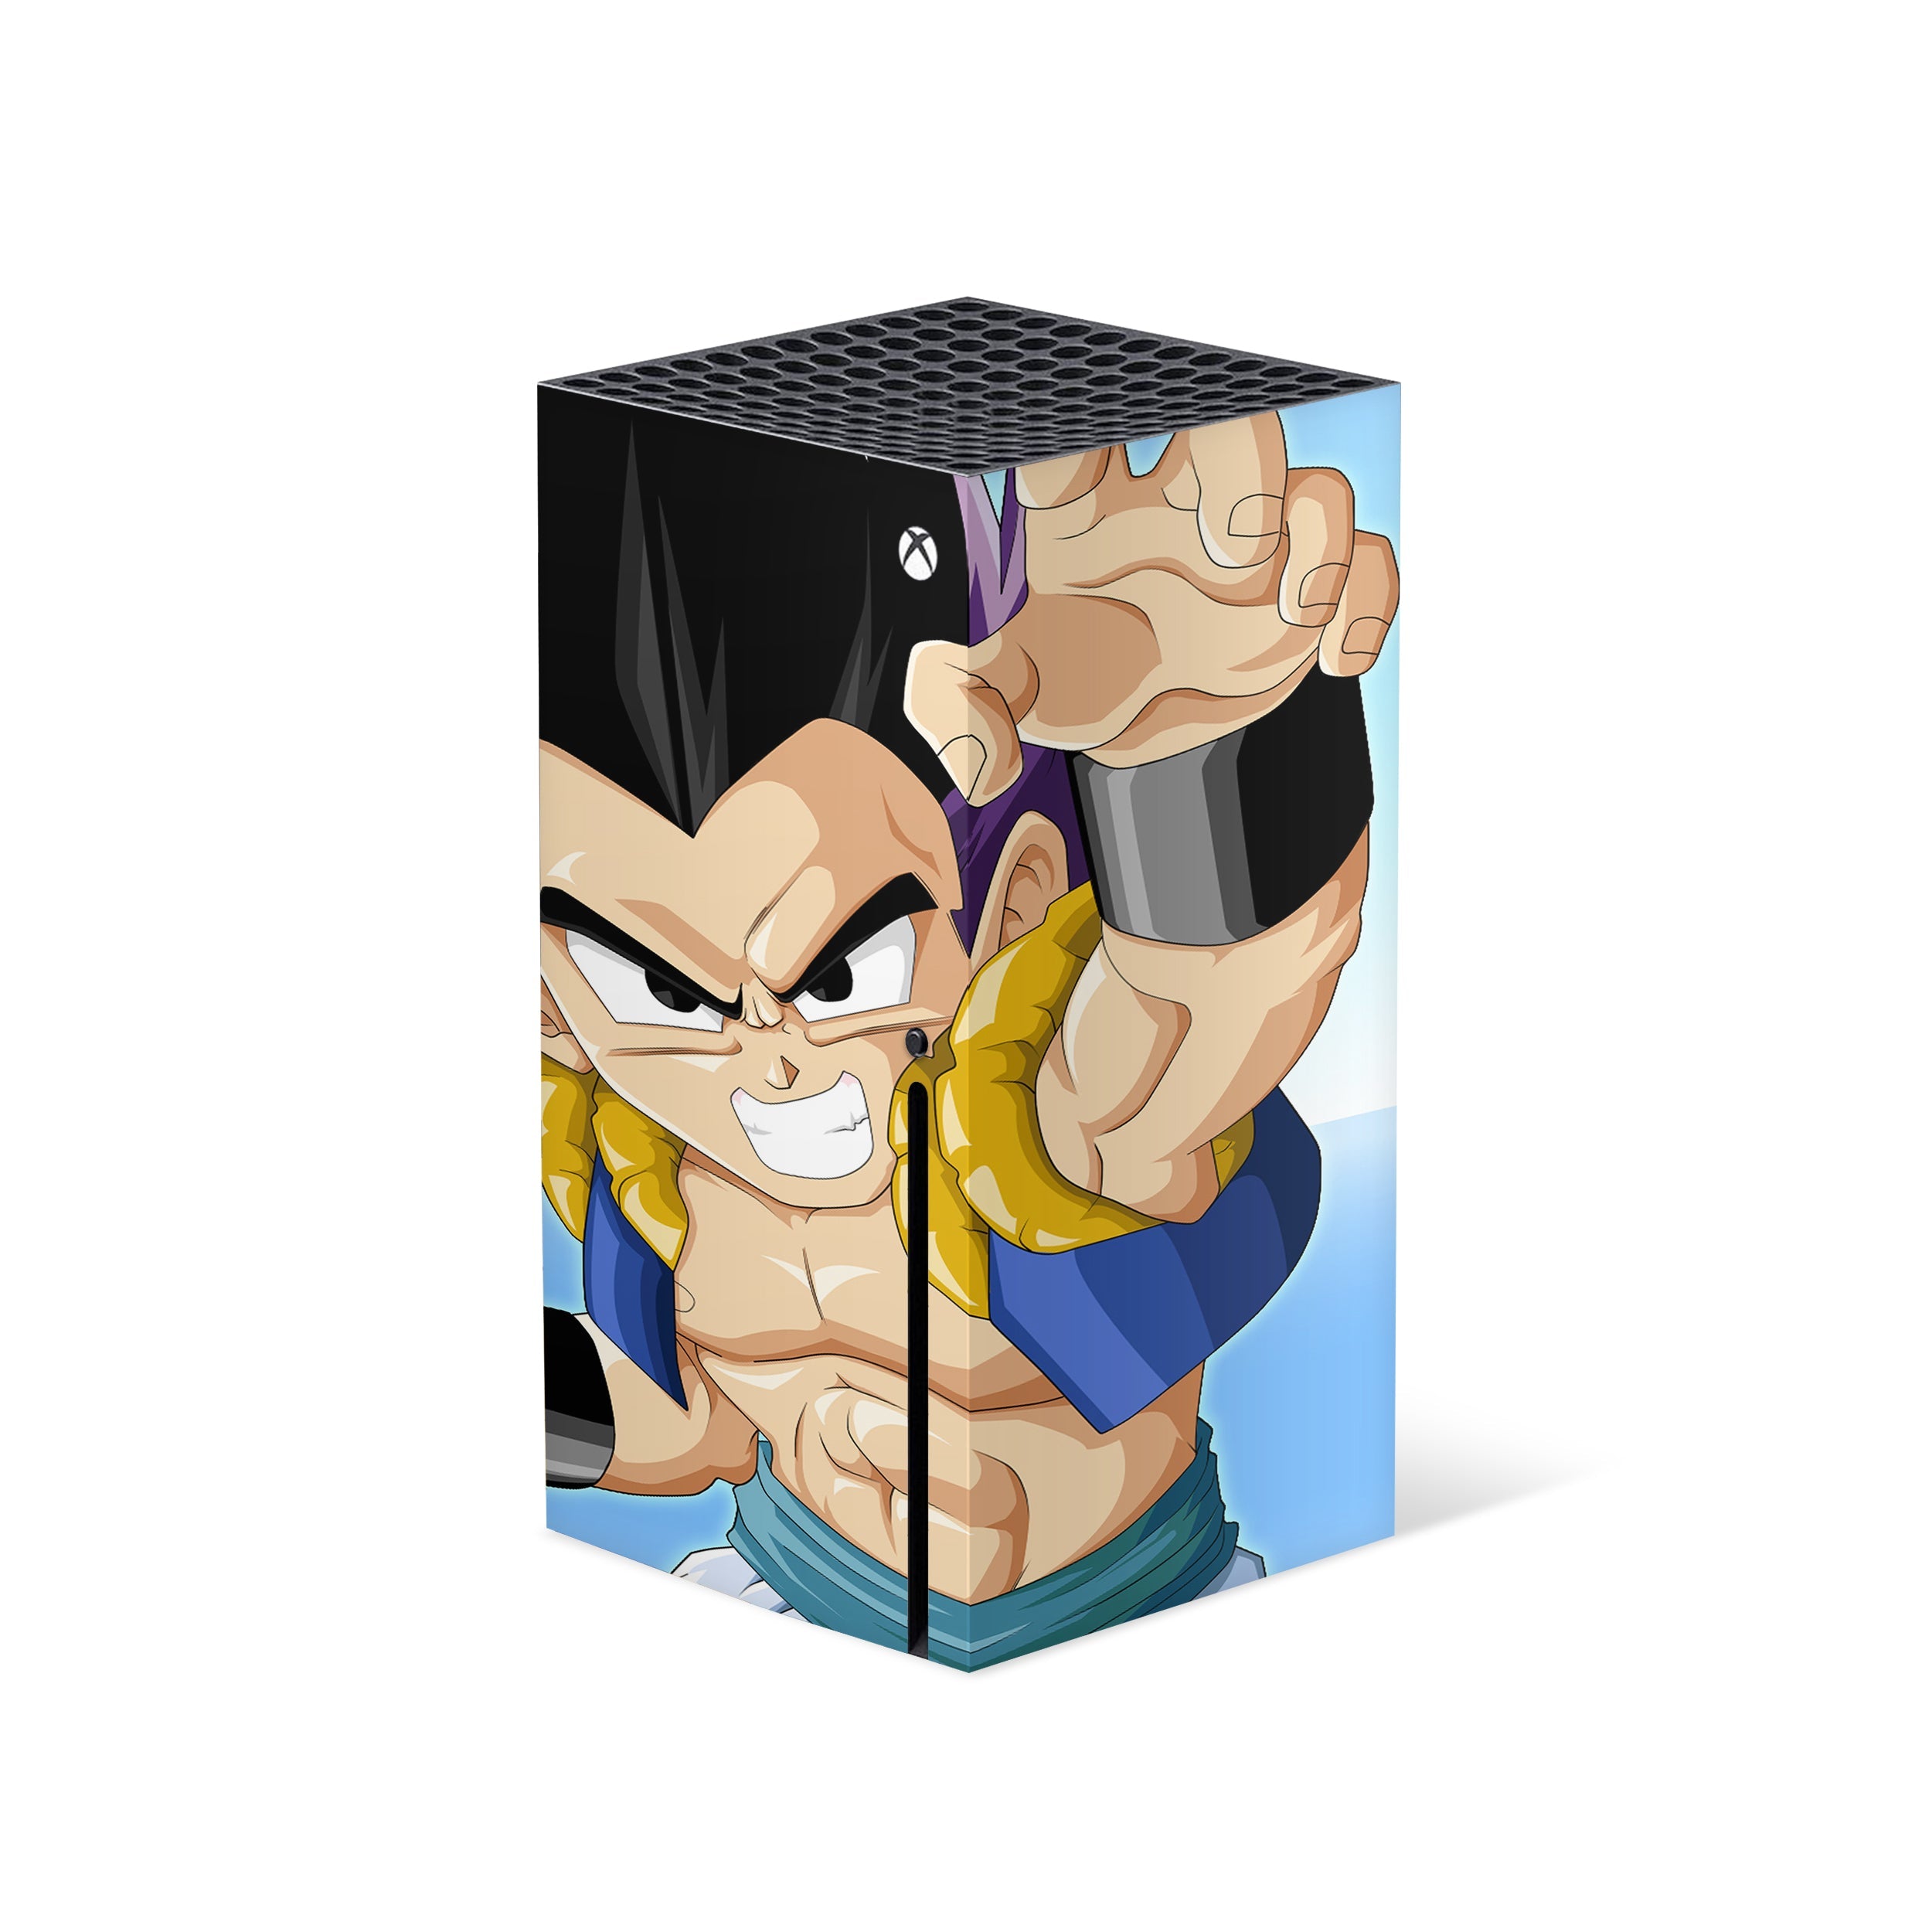 A video game skin featuring a Dragon Ball Super Gotenks design for the Xbox Series X.